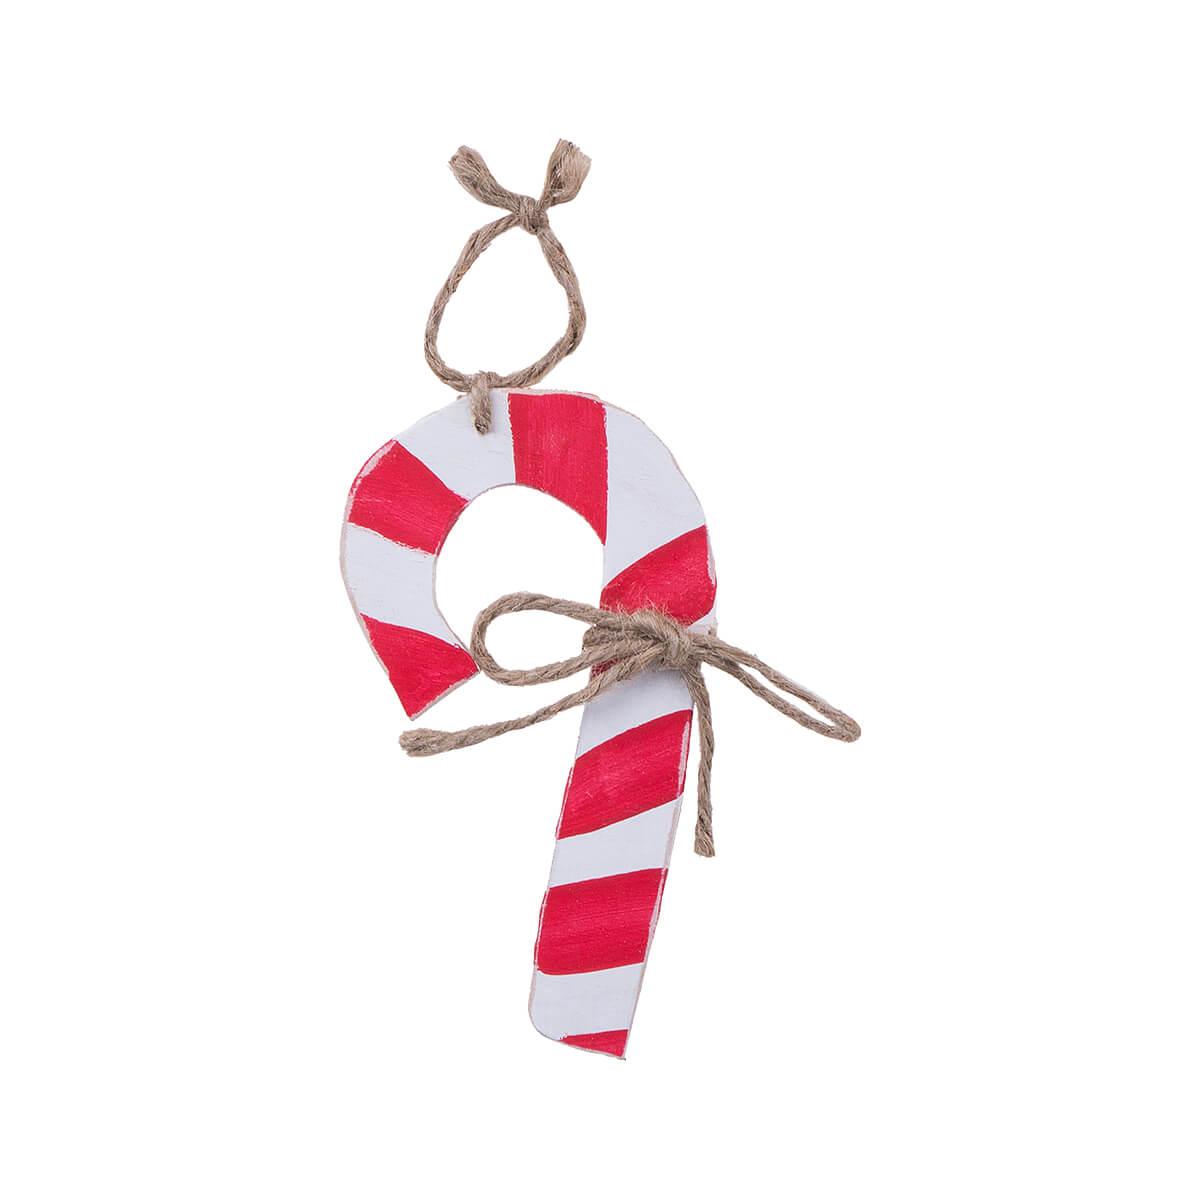  Wooden Candy Cane Ornament